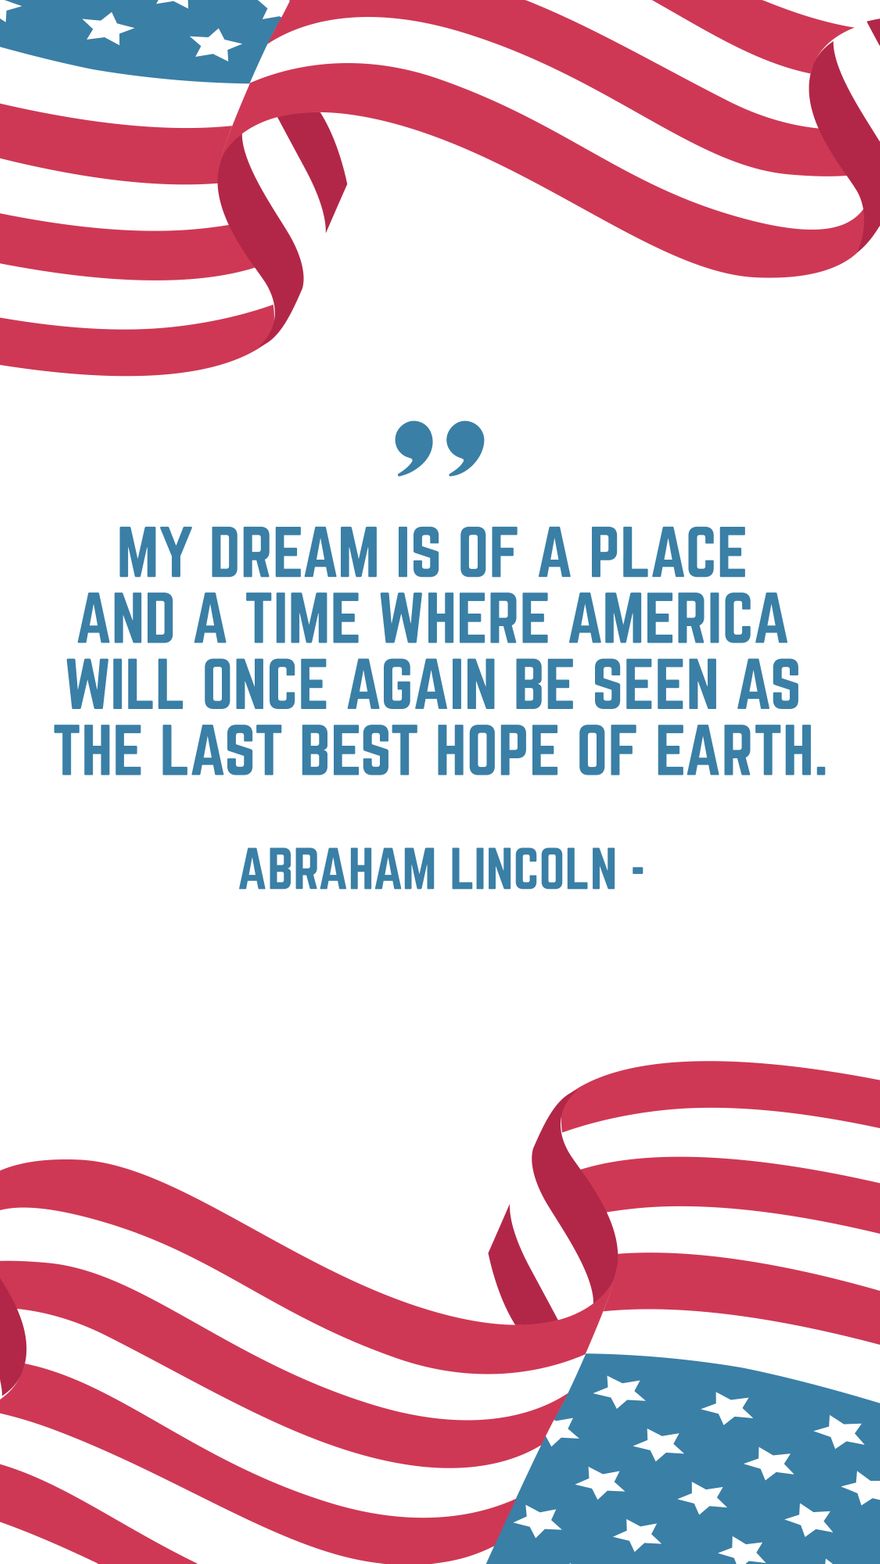 Free Abraham Lincoln - My dream is of a place and a time where America will once again be seen as the last best hope of earth.